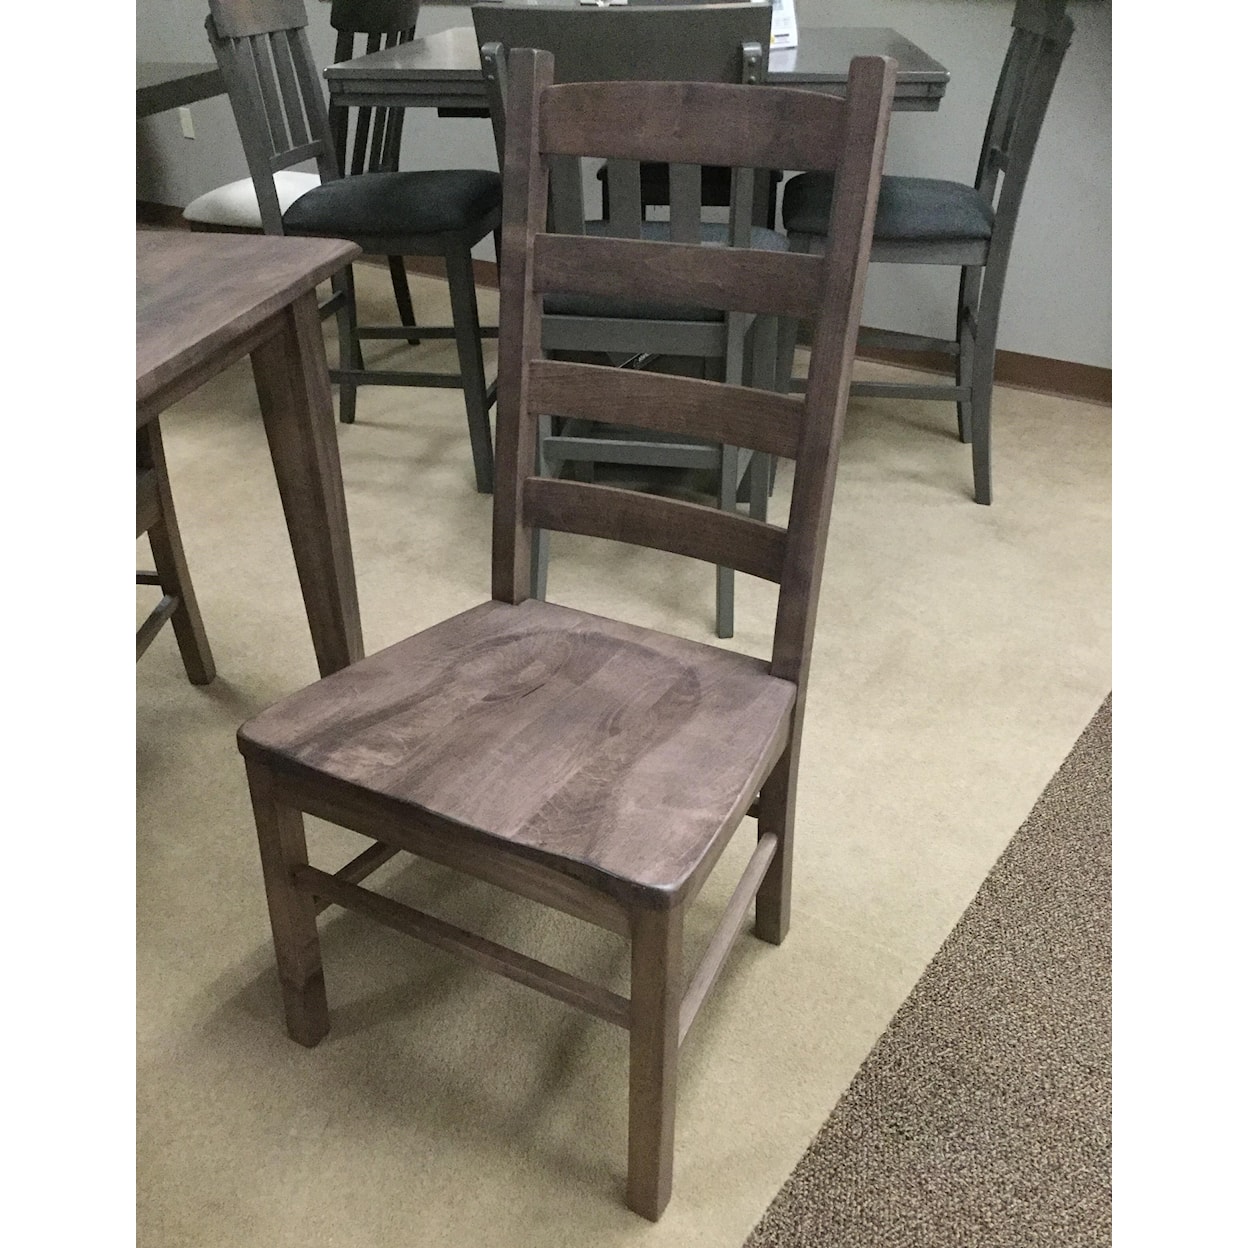 Daniel's Amish Chairs and Barstools Ladder Back Side Chair